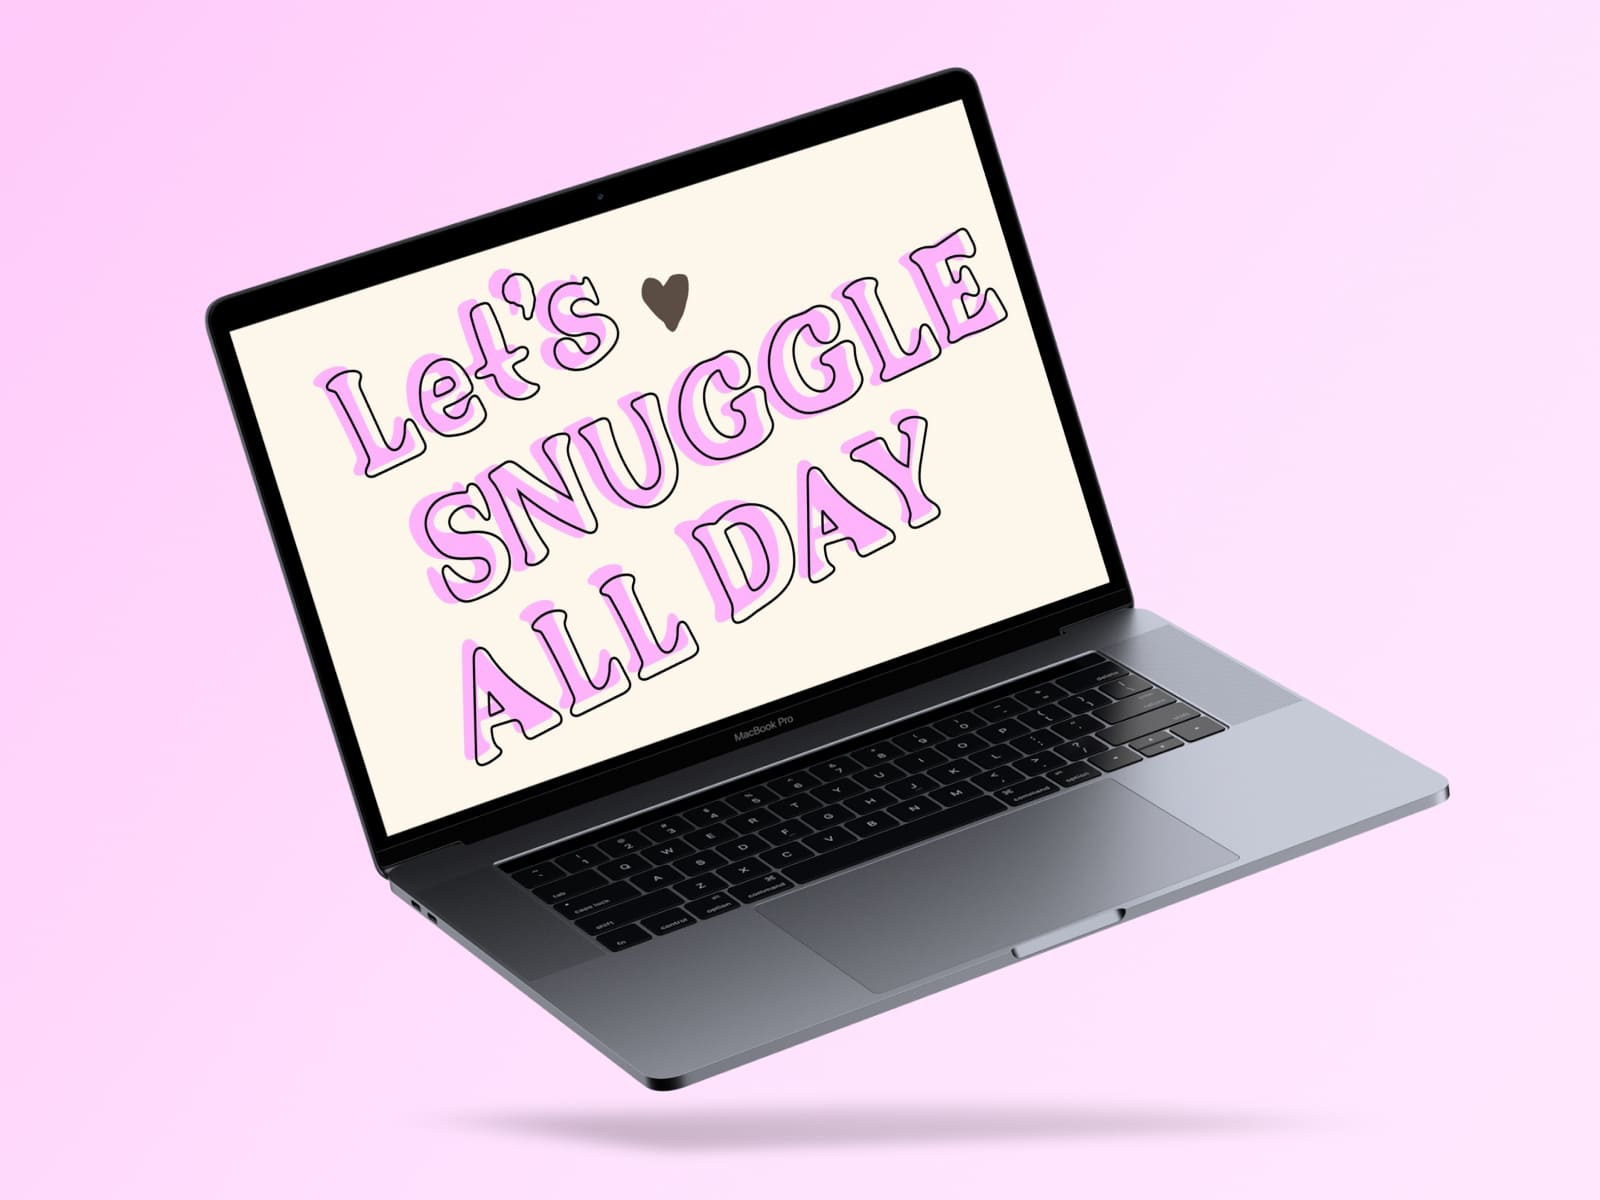 Cozy Outline - "Let's Snuggle All Day" On The Laptop.